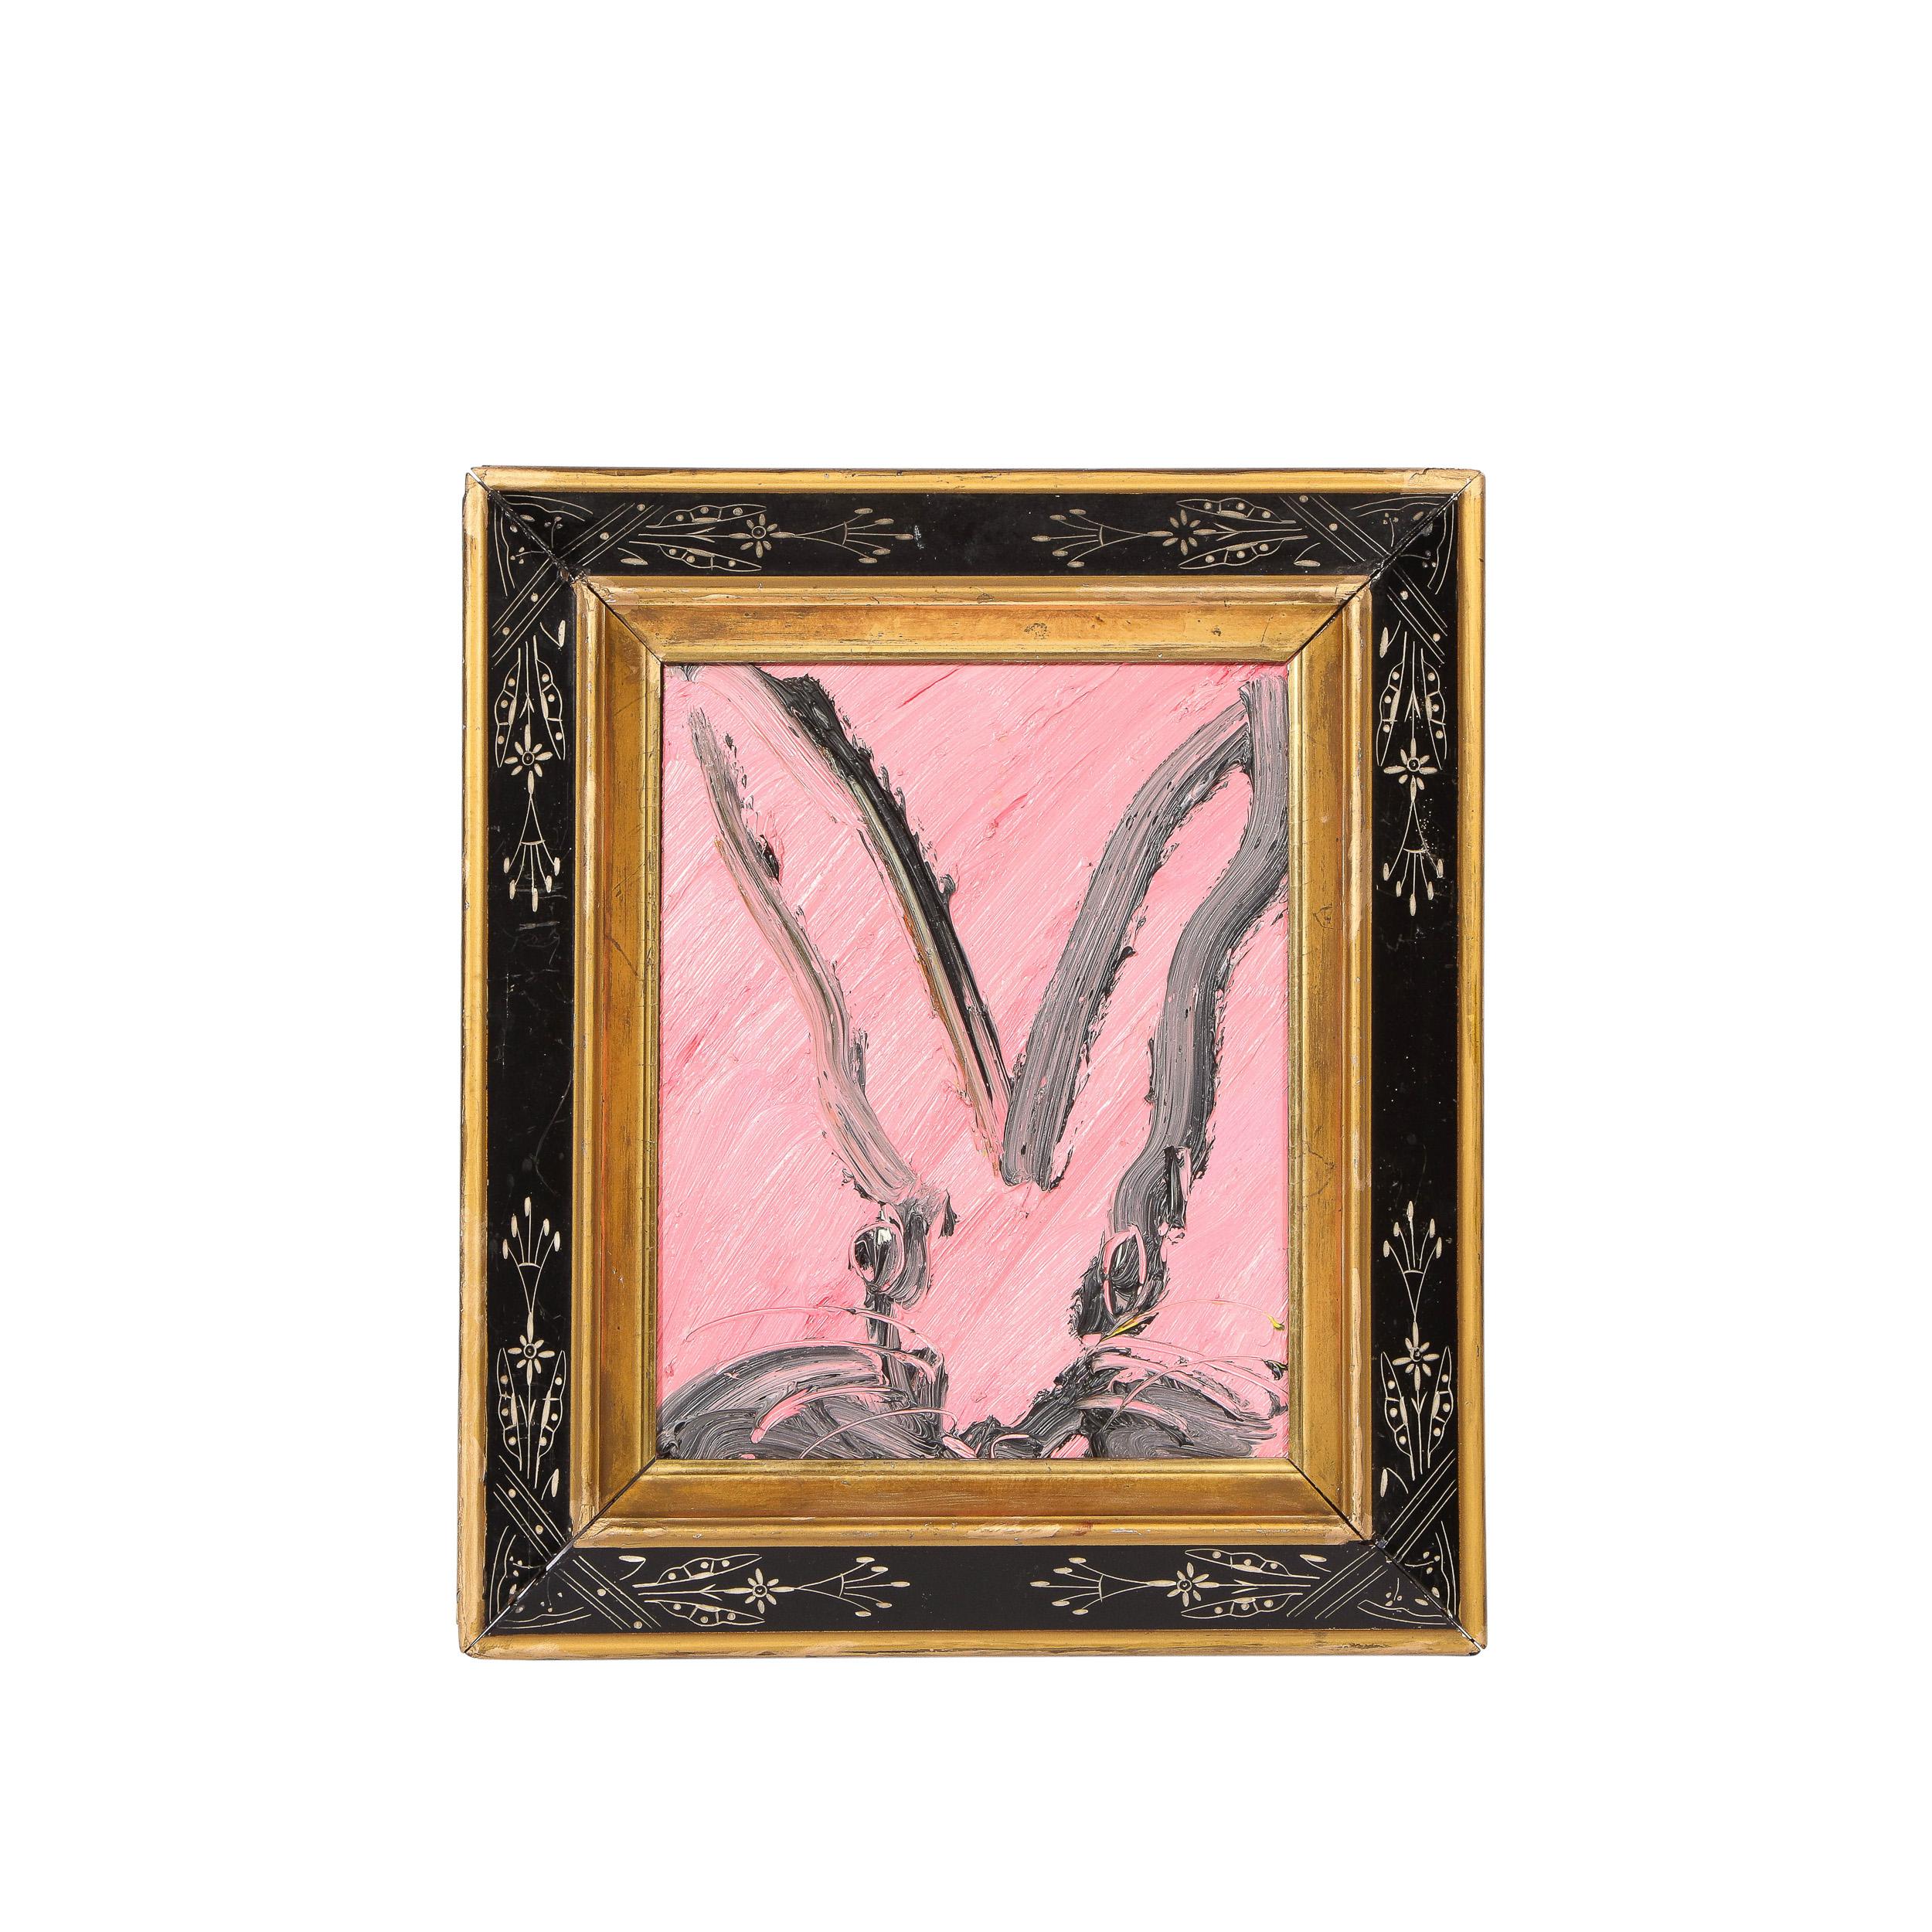 This sophisticated modern acrylic painting was realized by the esteemed contemporary painter, Hunt Slonem in 2015. It presents a stylized bunny rabbit, rendered with loose and expressive brush strokes in grisaille paint in profile against a hot pink